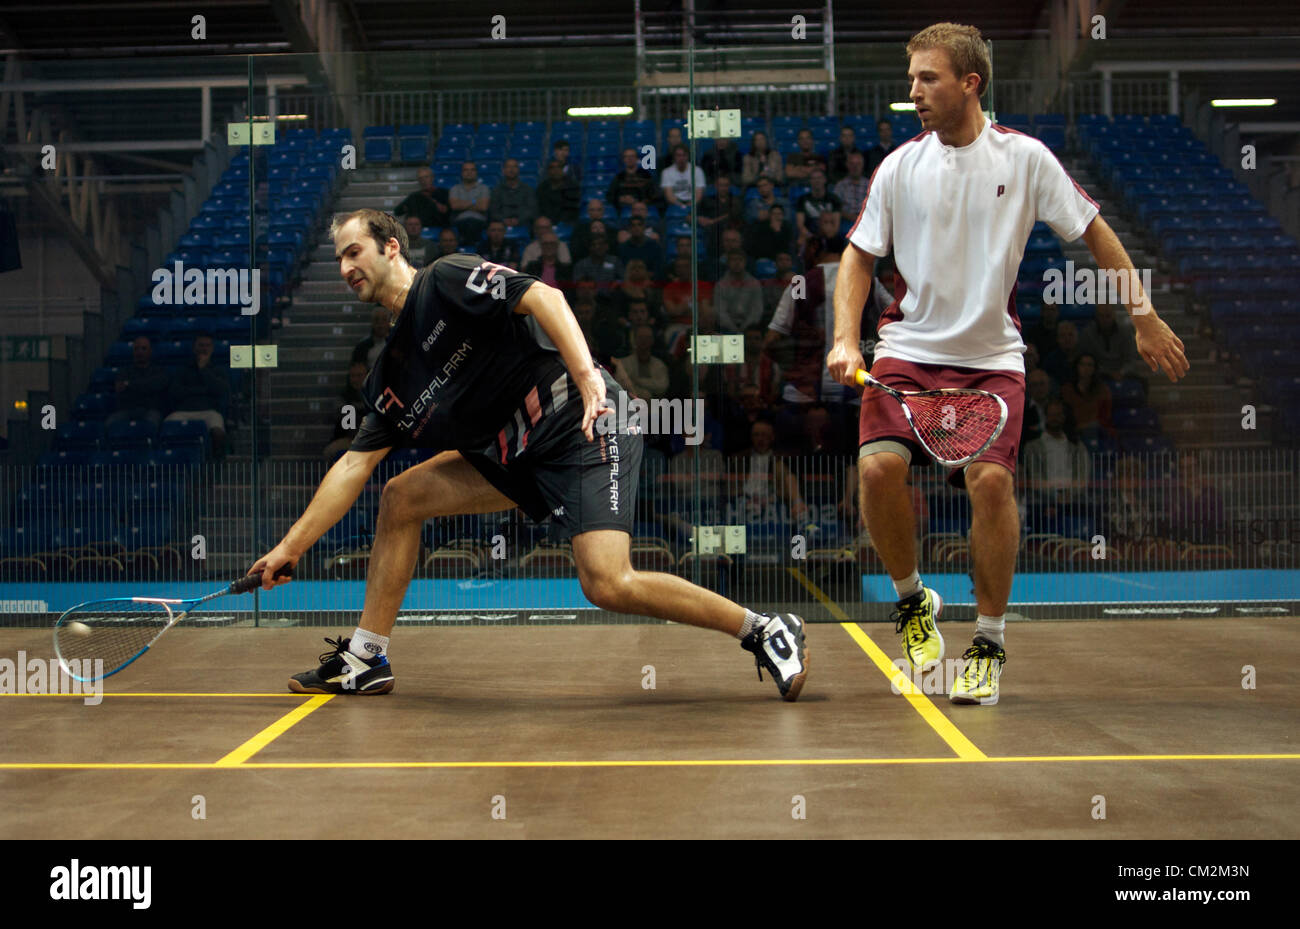 Simon Rosner (Germany) makes a forehand return during his match with  Matthieu Castagnet (France). Rosner won